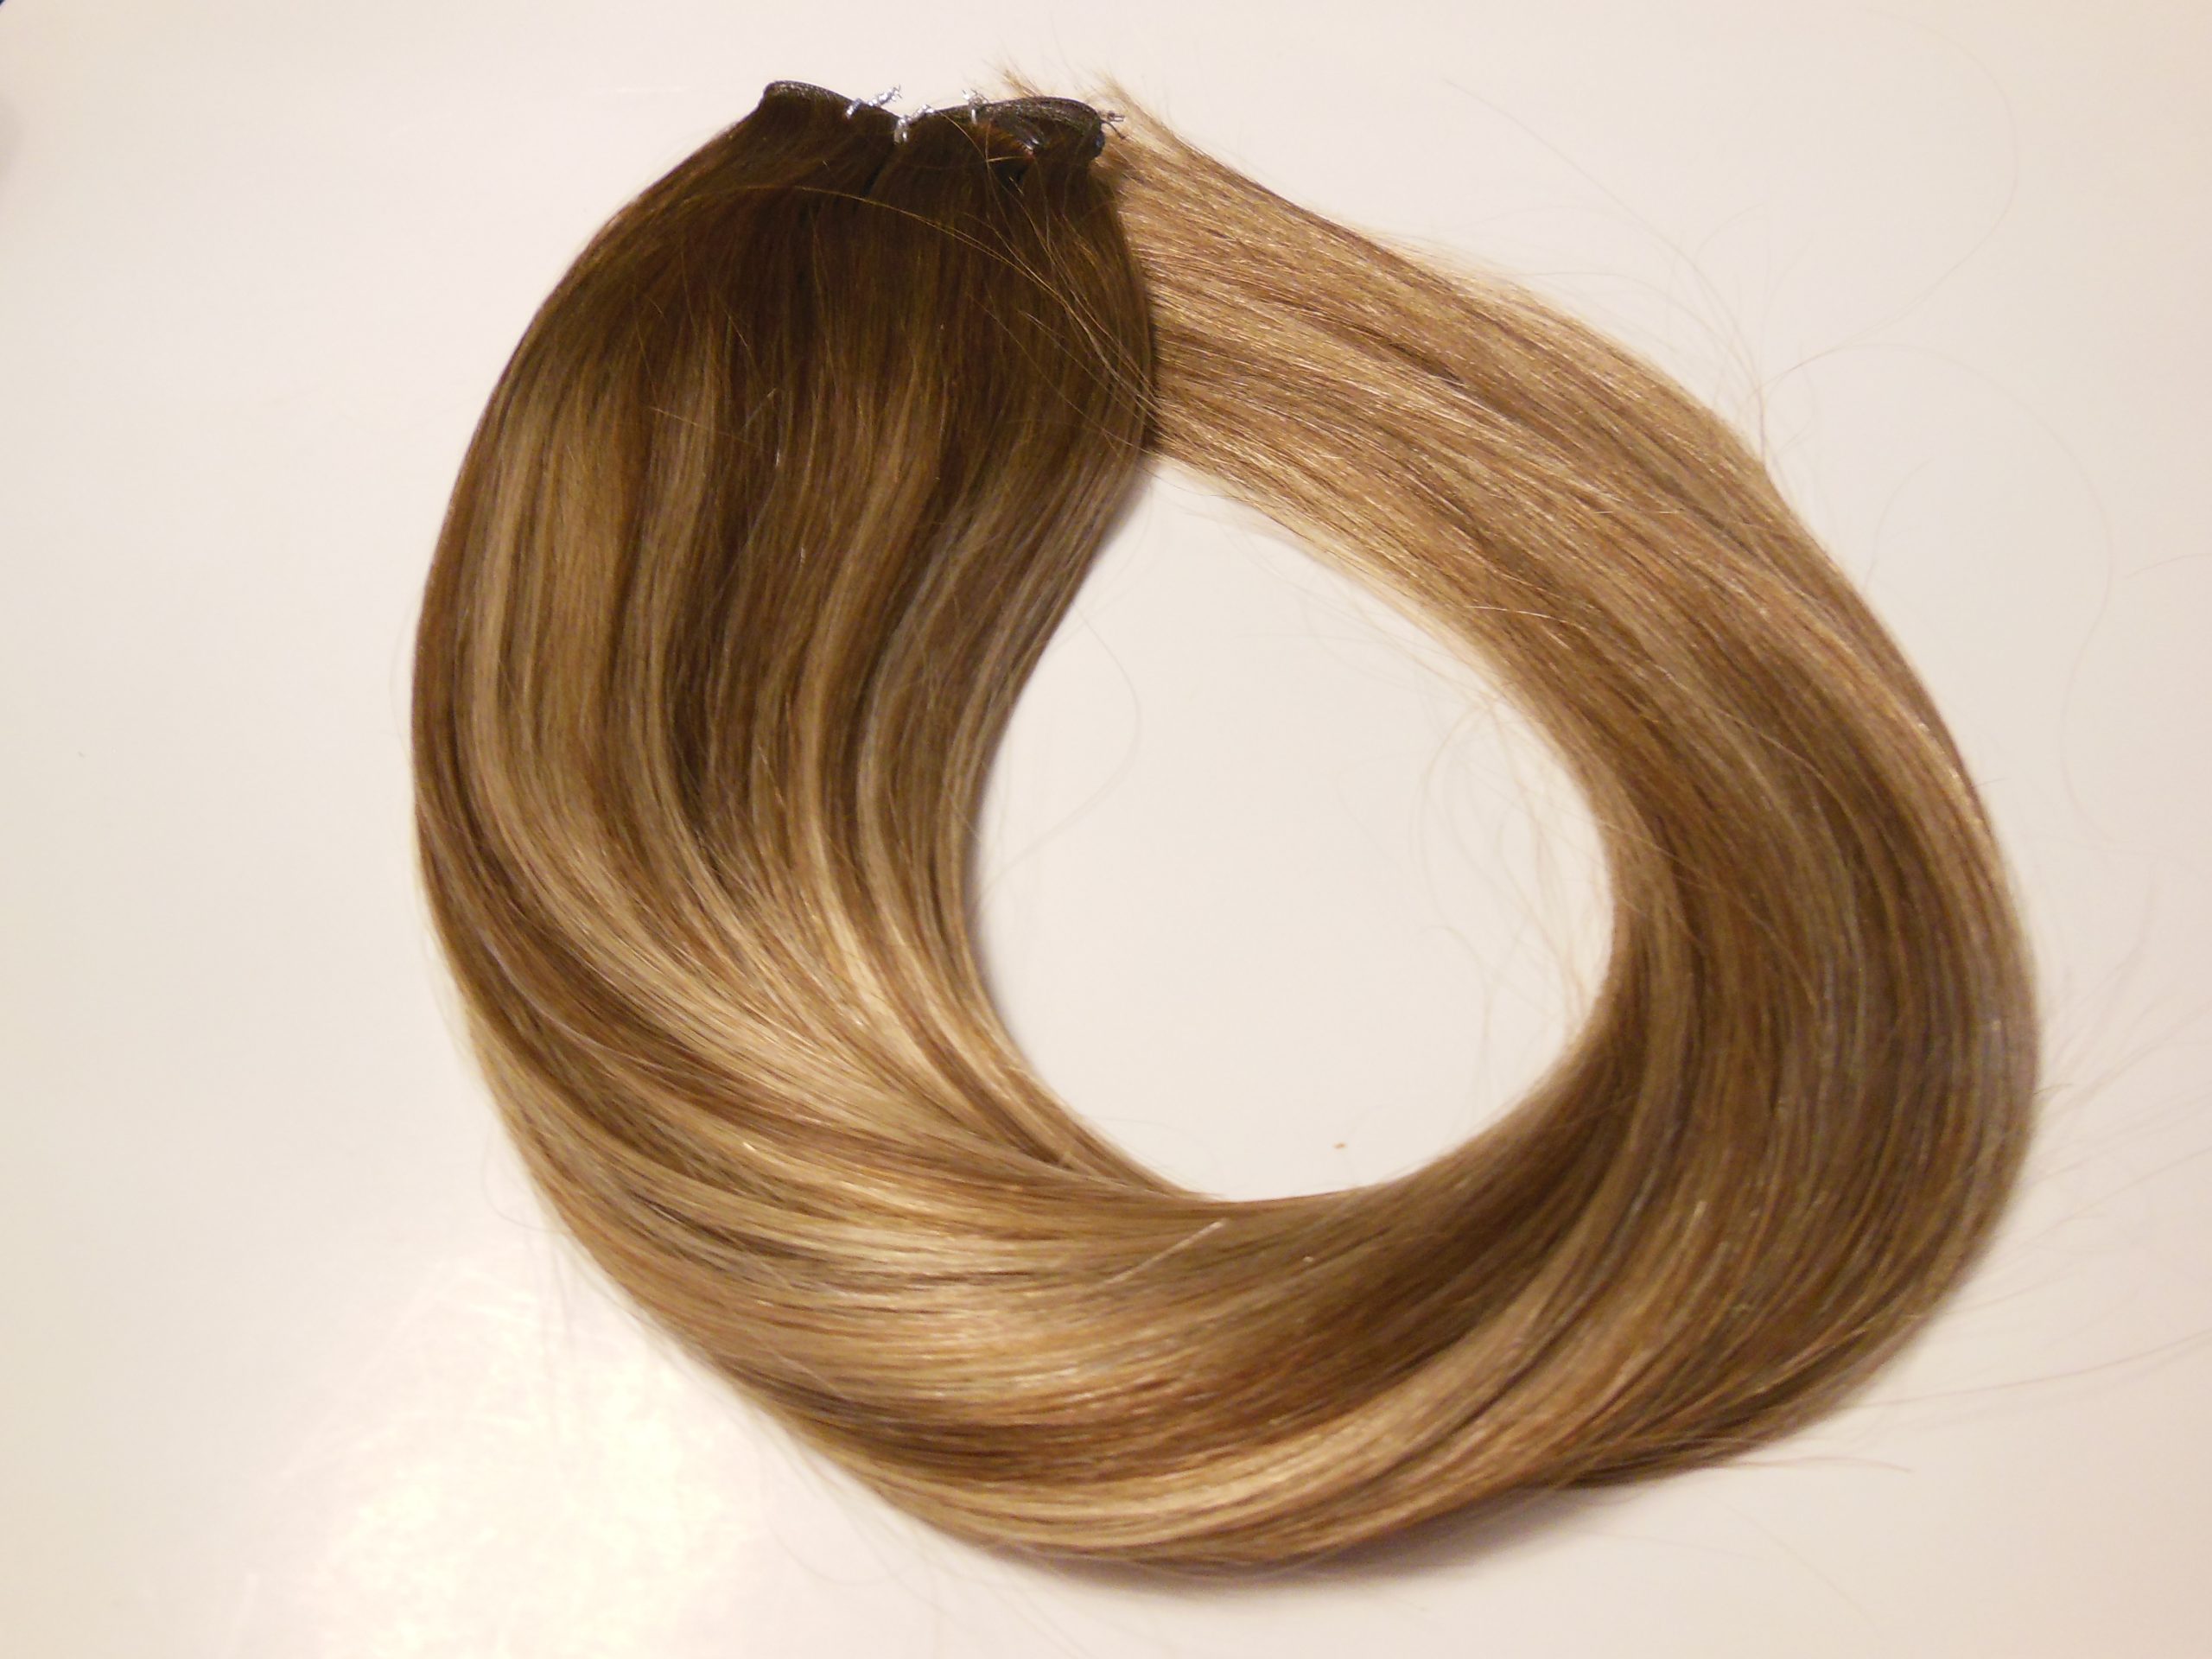 5. "Thick Blonde Hair Weft" by Hair Extensions.com - wide 2